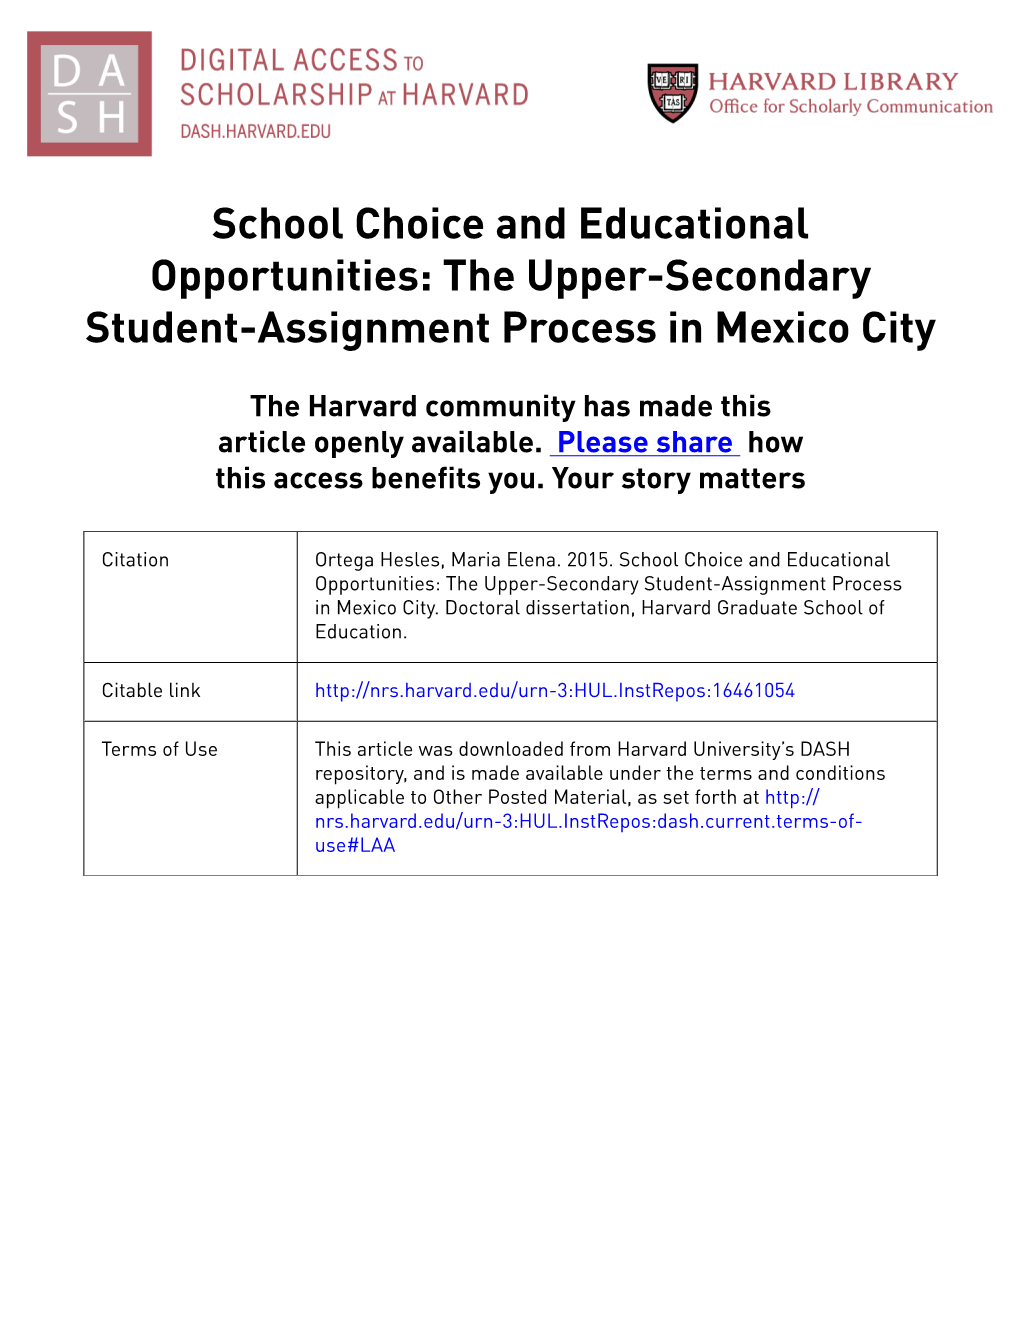 School Choice and Educational Opportunities: the Upper-Secondary Student-Assignment Process in Mexico City